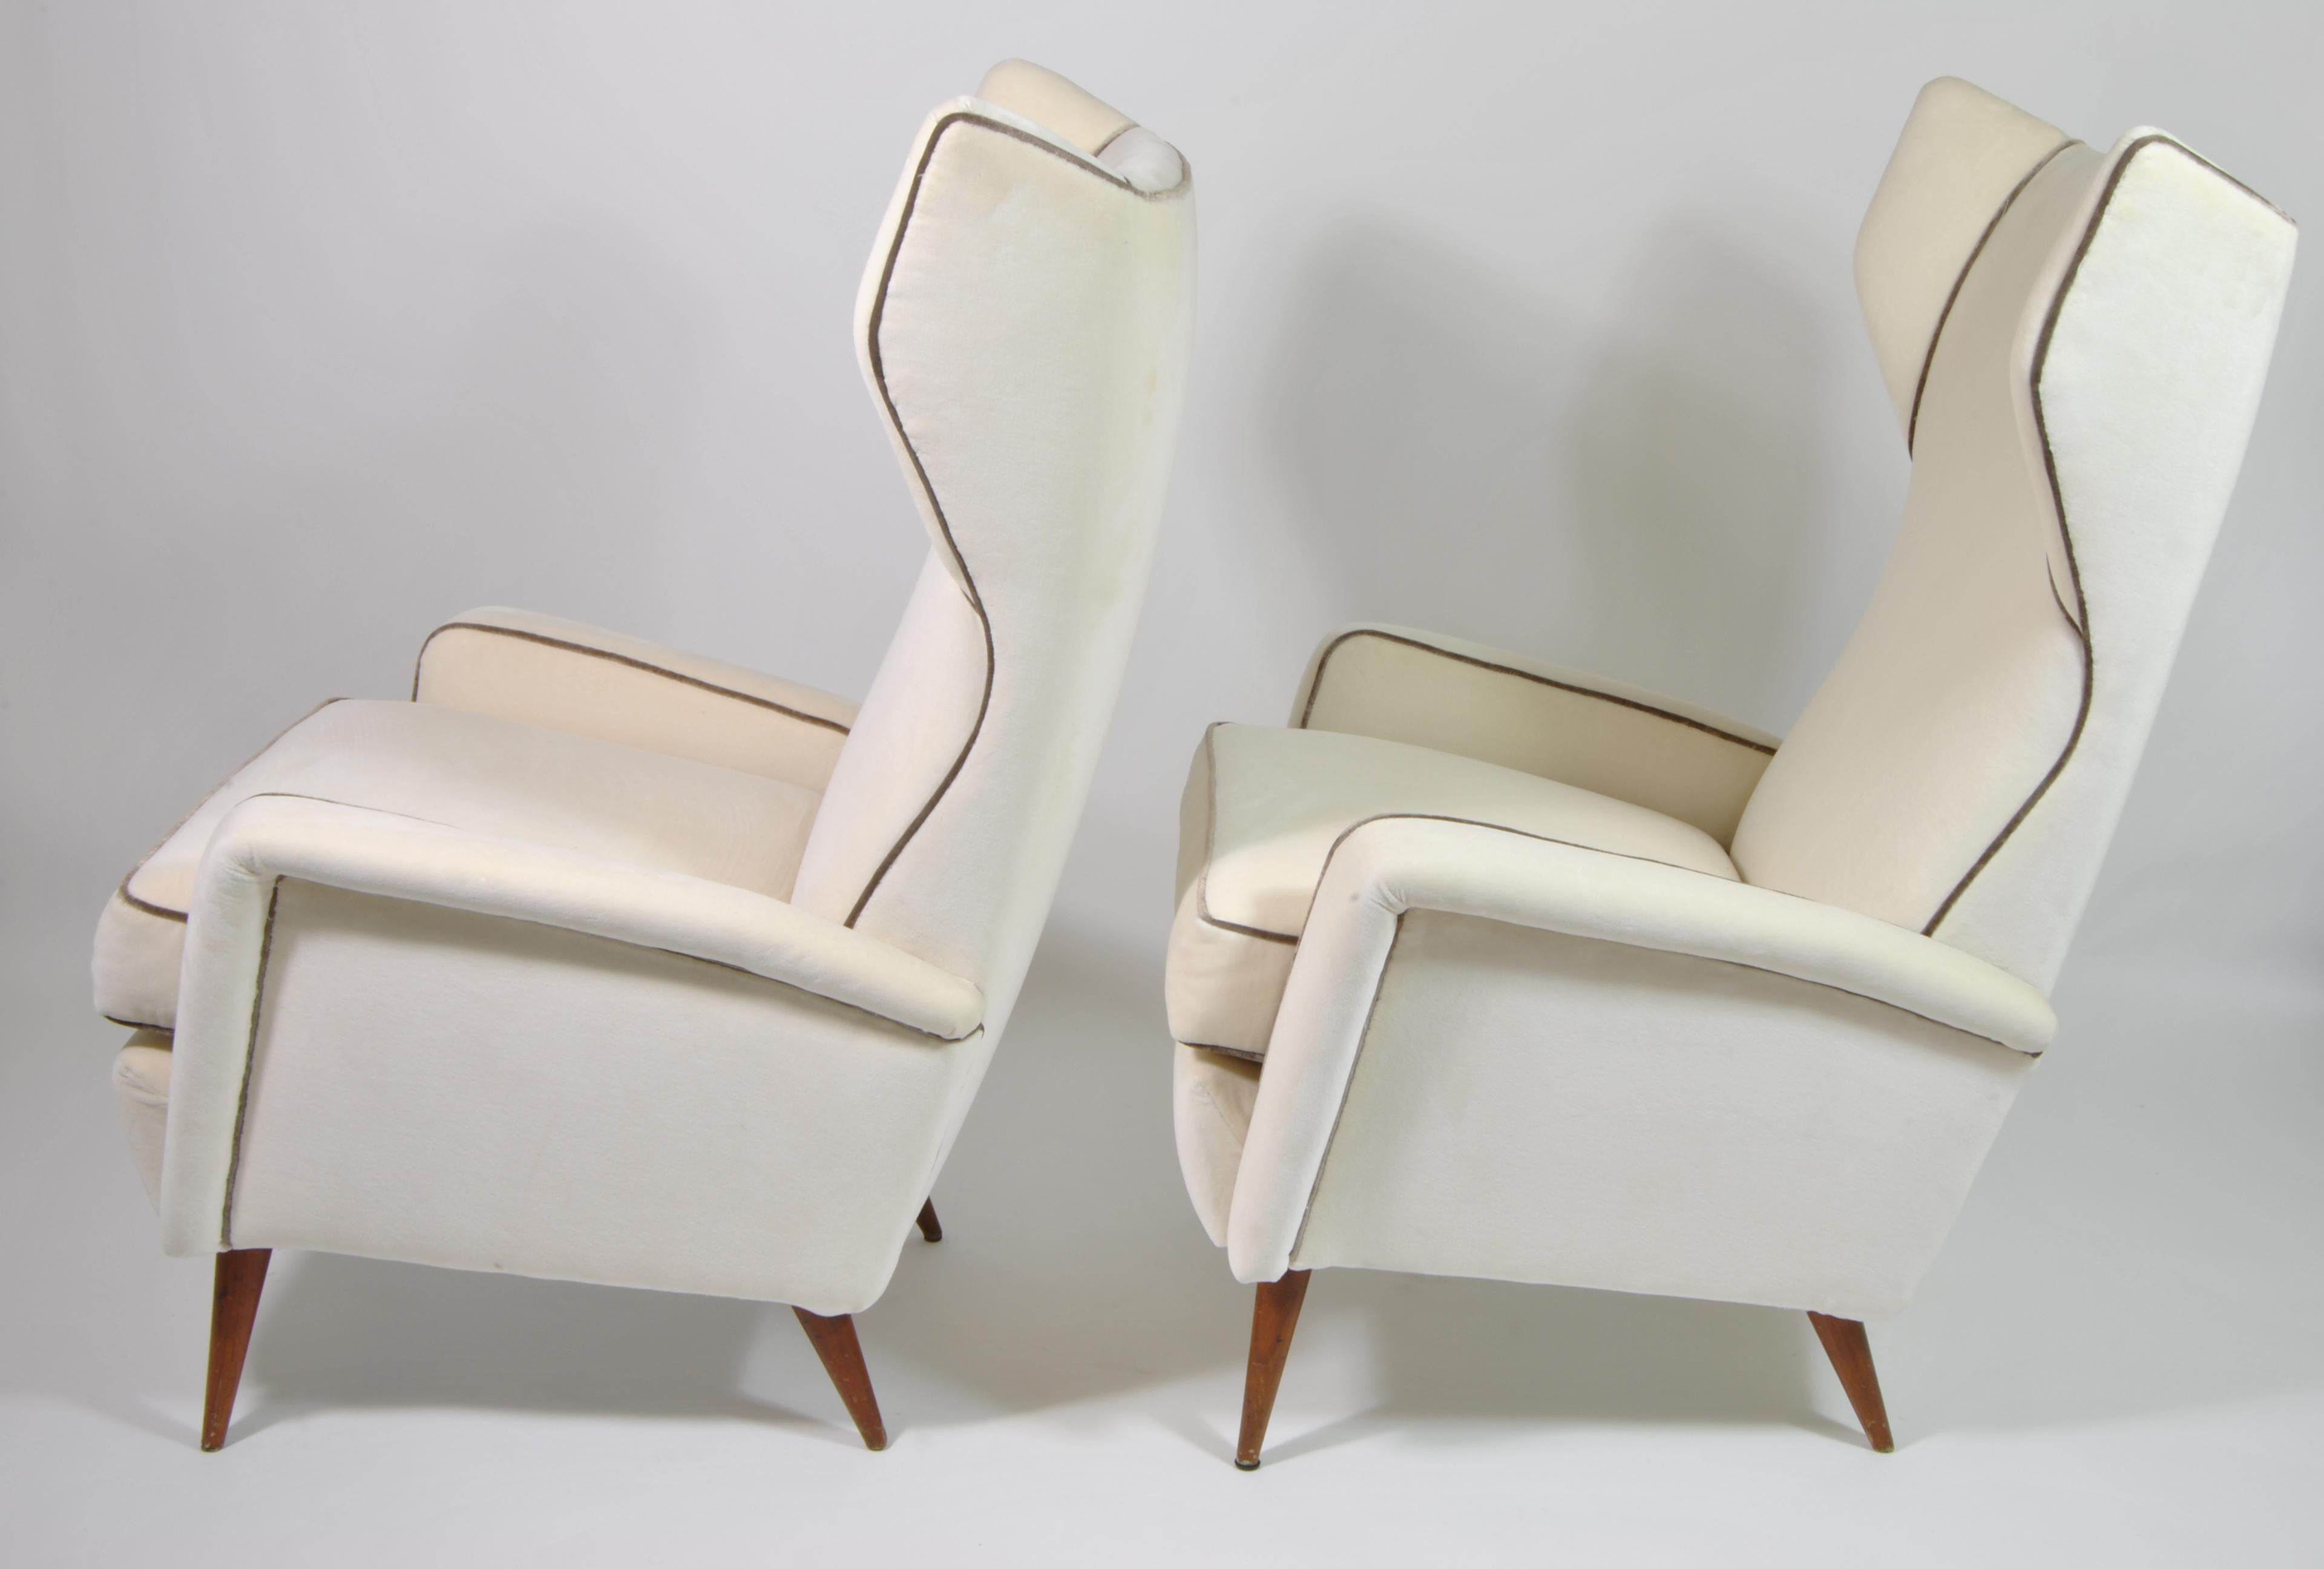 Mid-Century Modern Bergère Couple, Mod. 820, Designed by Gio Ponti, Cassina Production, Italy, 1950